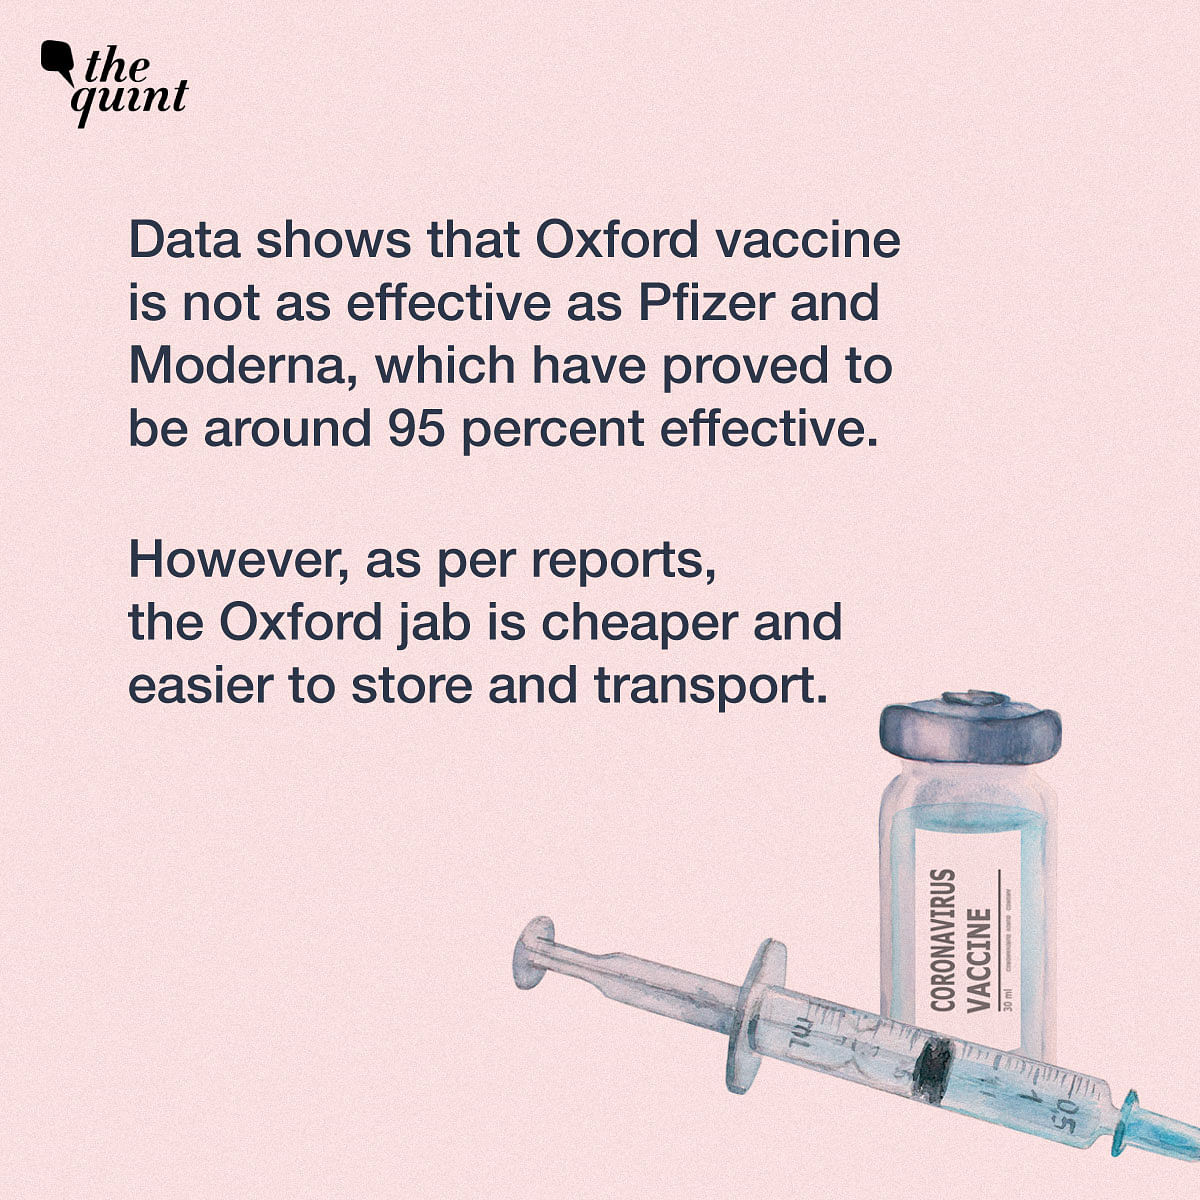 The Oxford jab is reportedly both cheaper and easier to store and transport in comparison to other options.